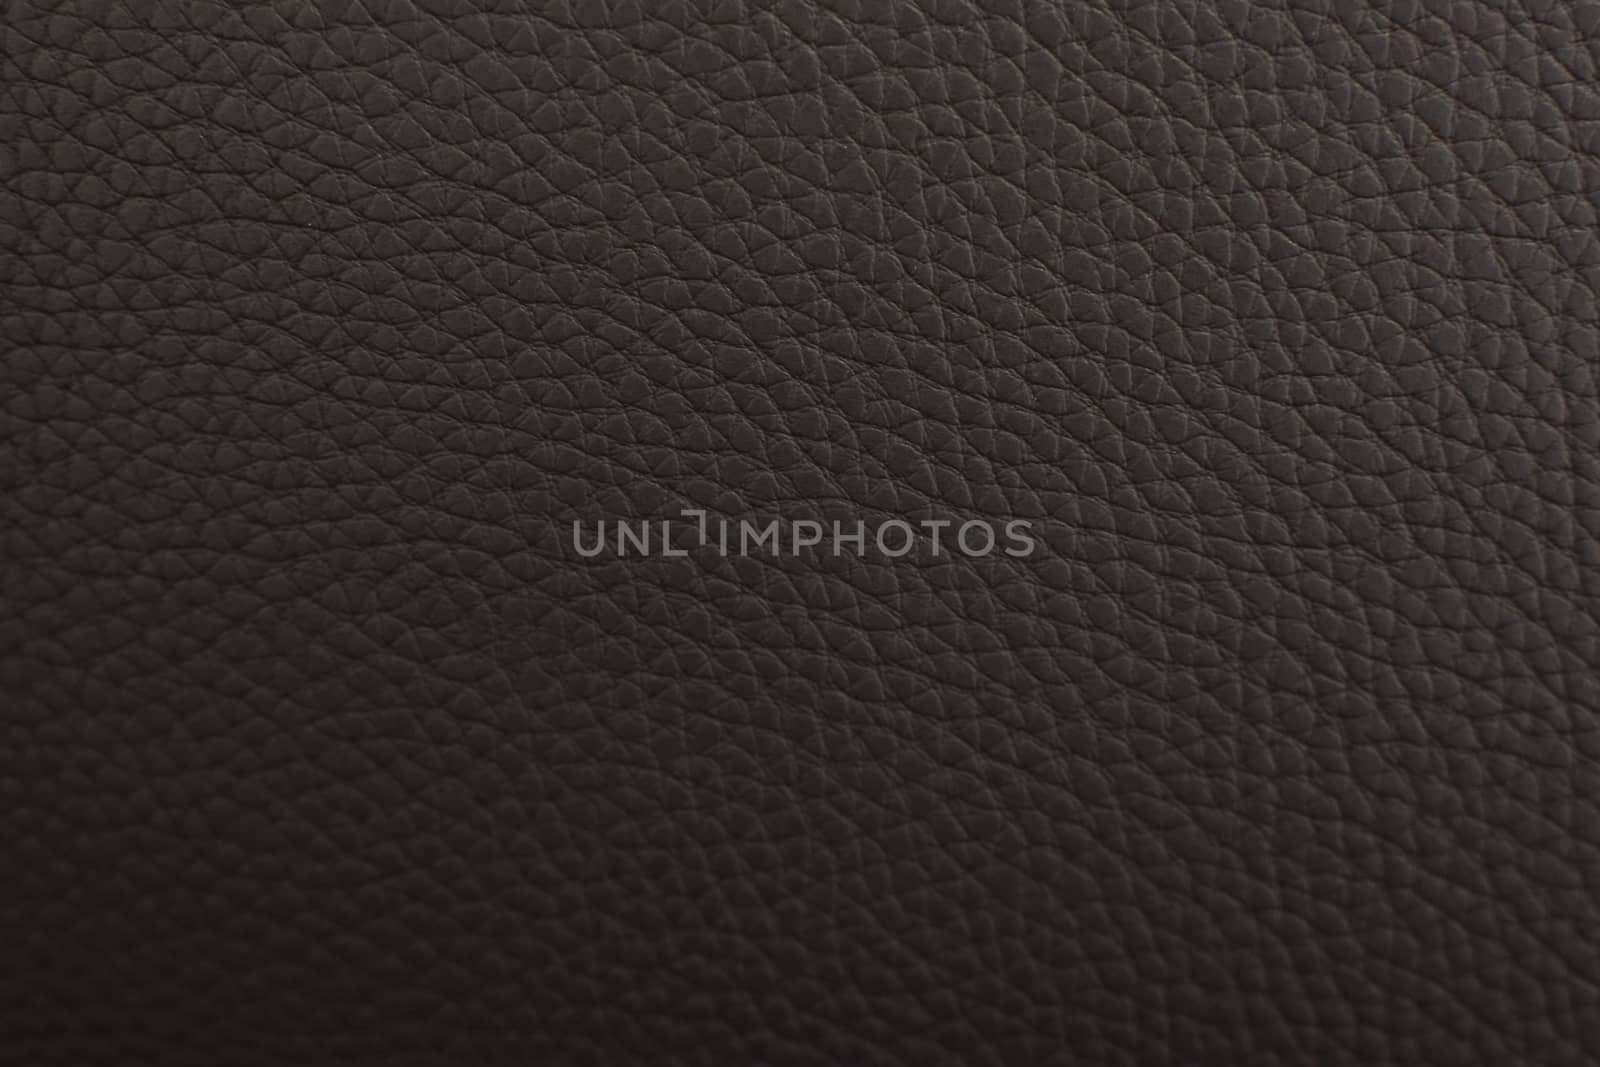 Brown leather texture background in close-up